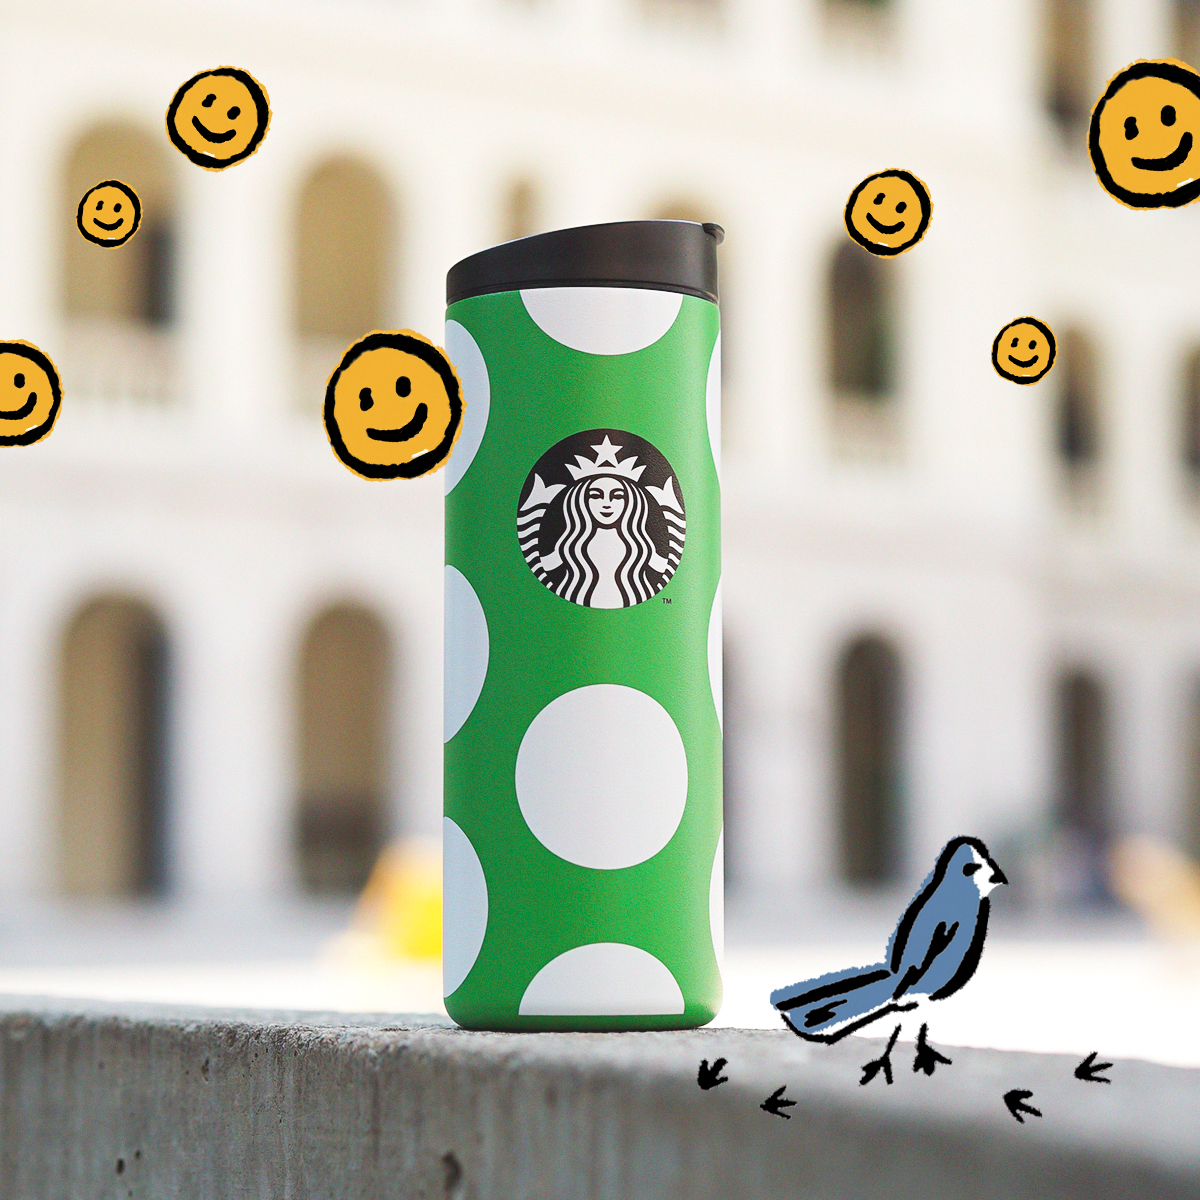 Starbucks x Kate Spade New York Collection Has NYC-Inspired Tumblers